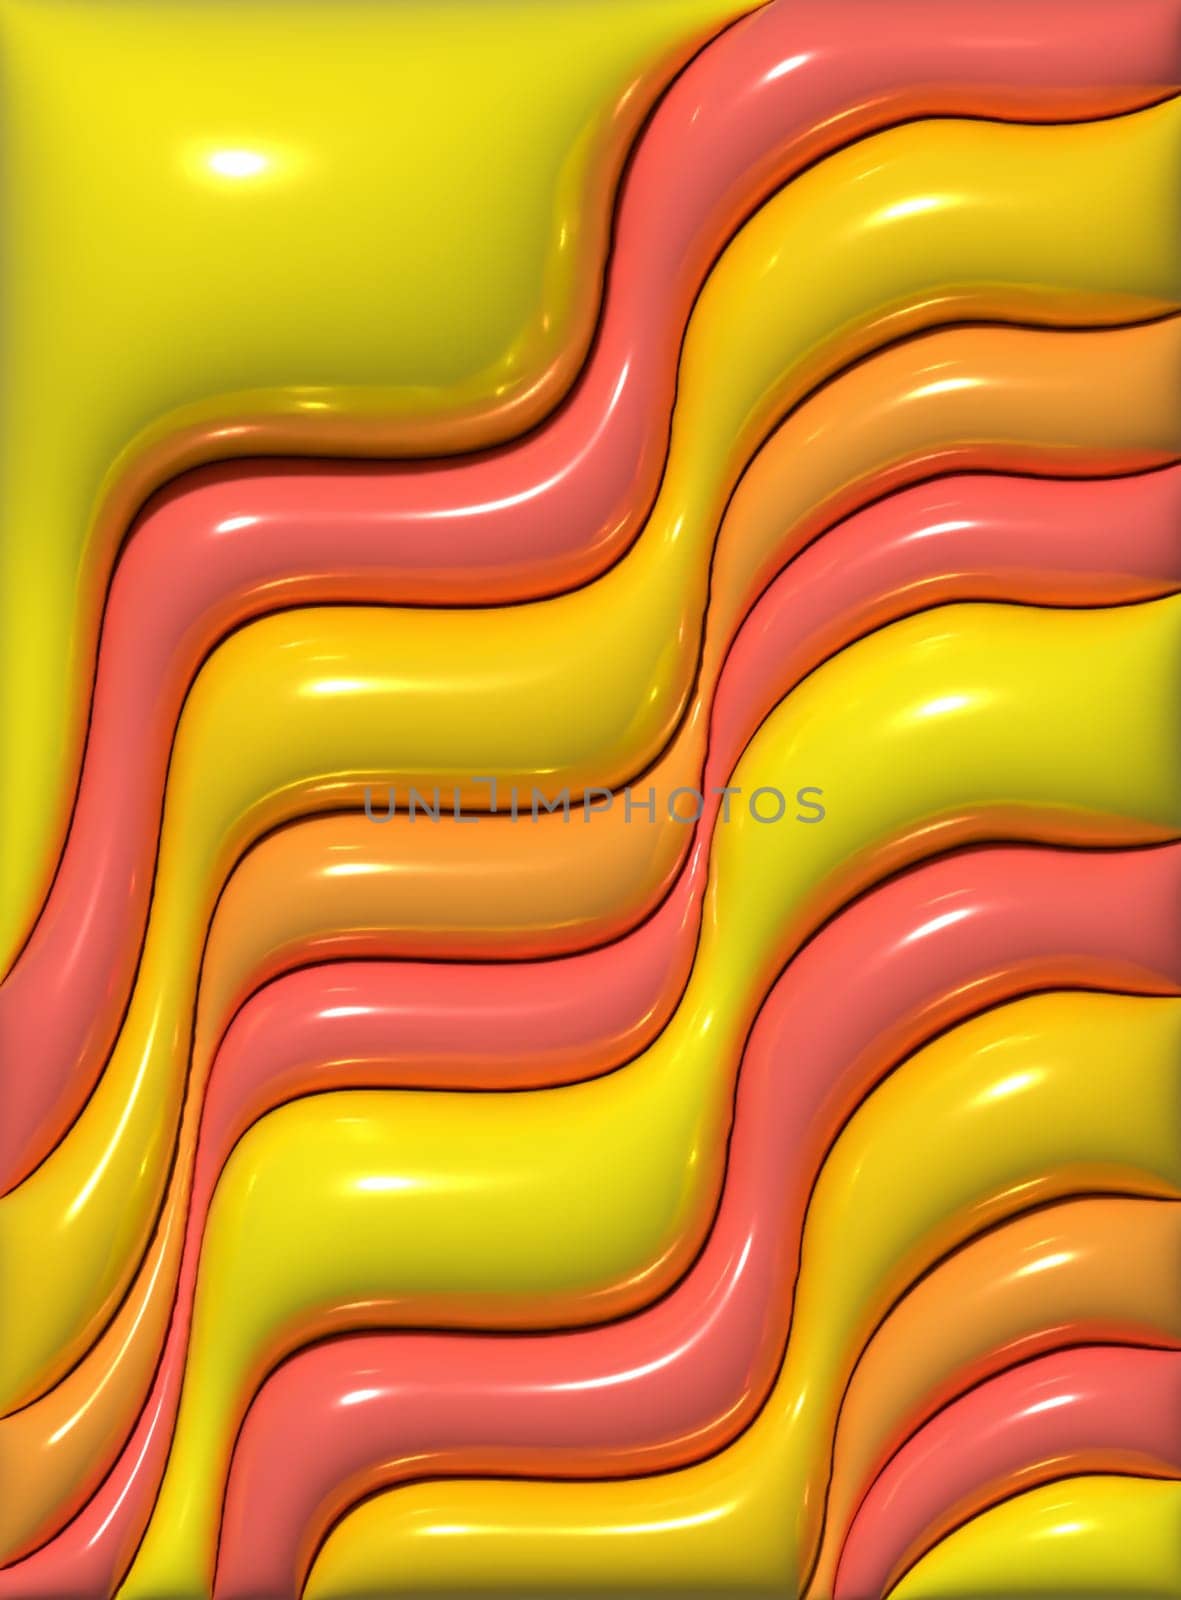 Abstract background with various inflated figures, 3D rendering illustration by ndanko